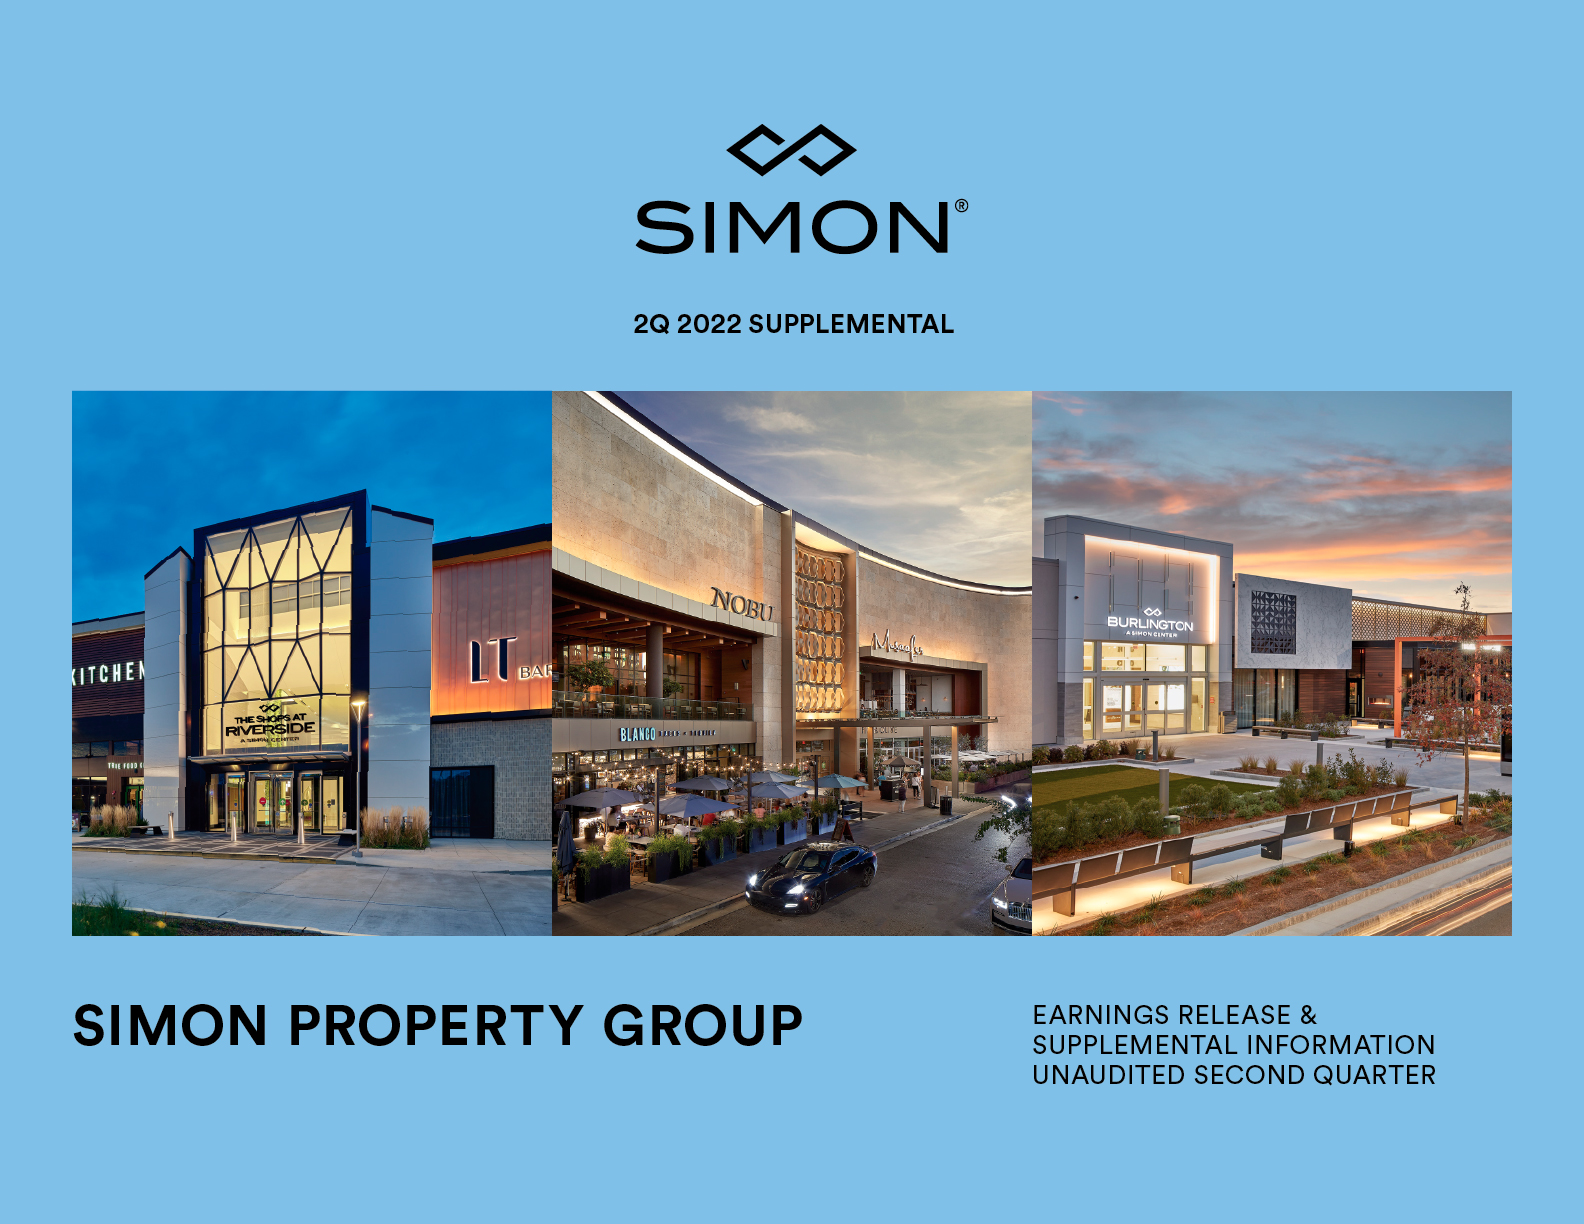 Leasing & Advertising at The Galleria, a SIMON Center